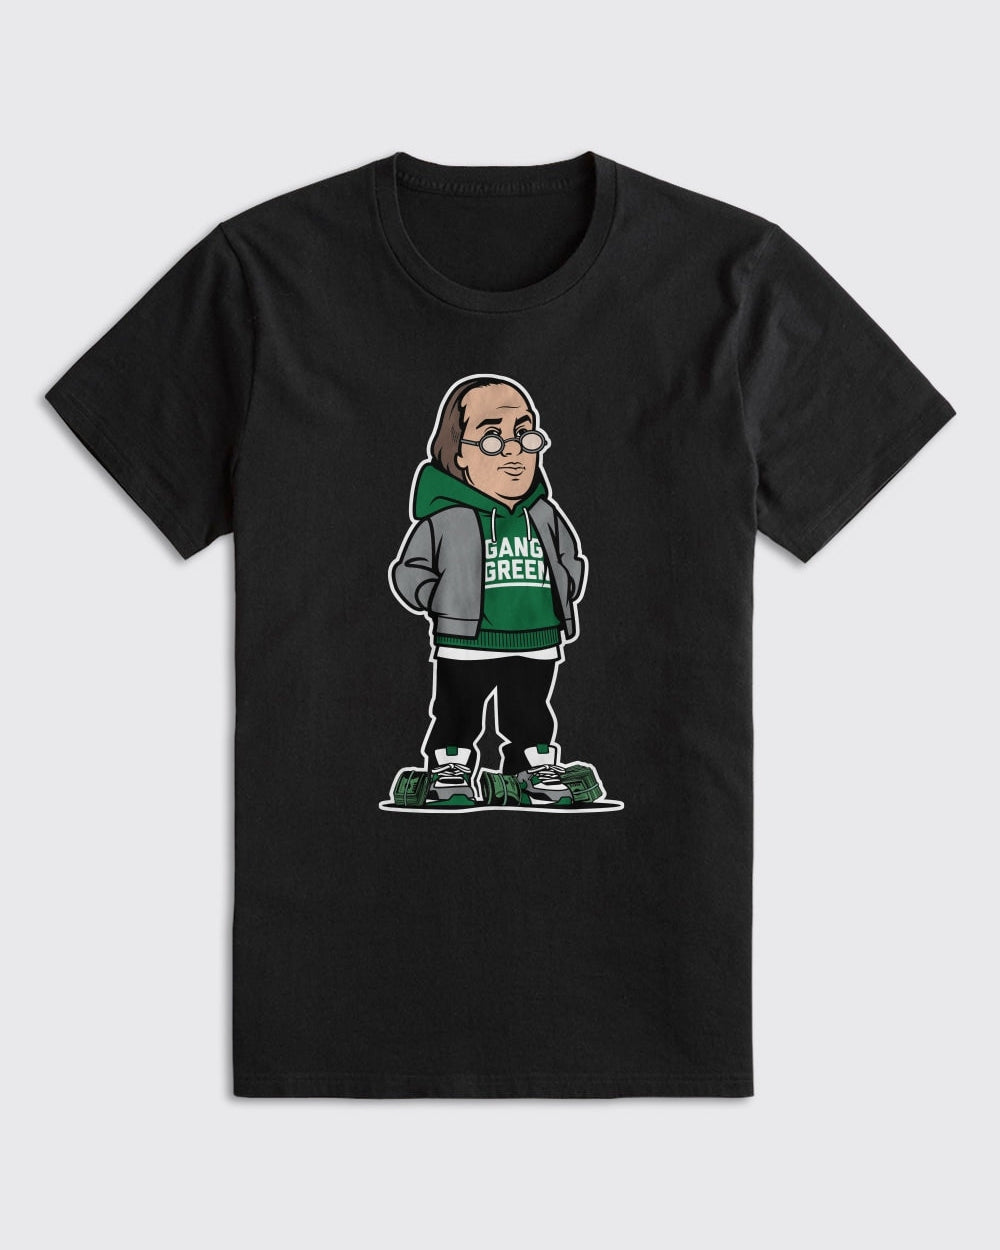 Ben Franklin Eagles Shirt - Eagles, T-Shirts - Philly Sports Shirts